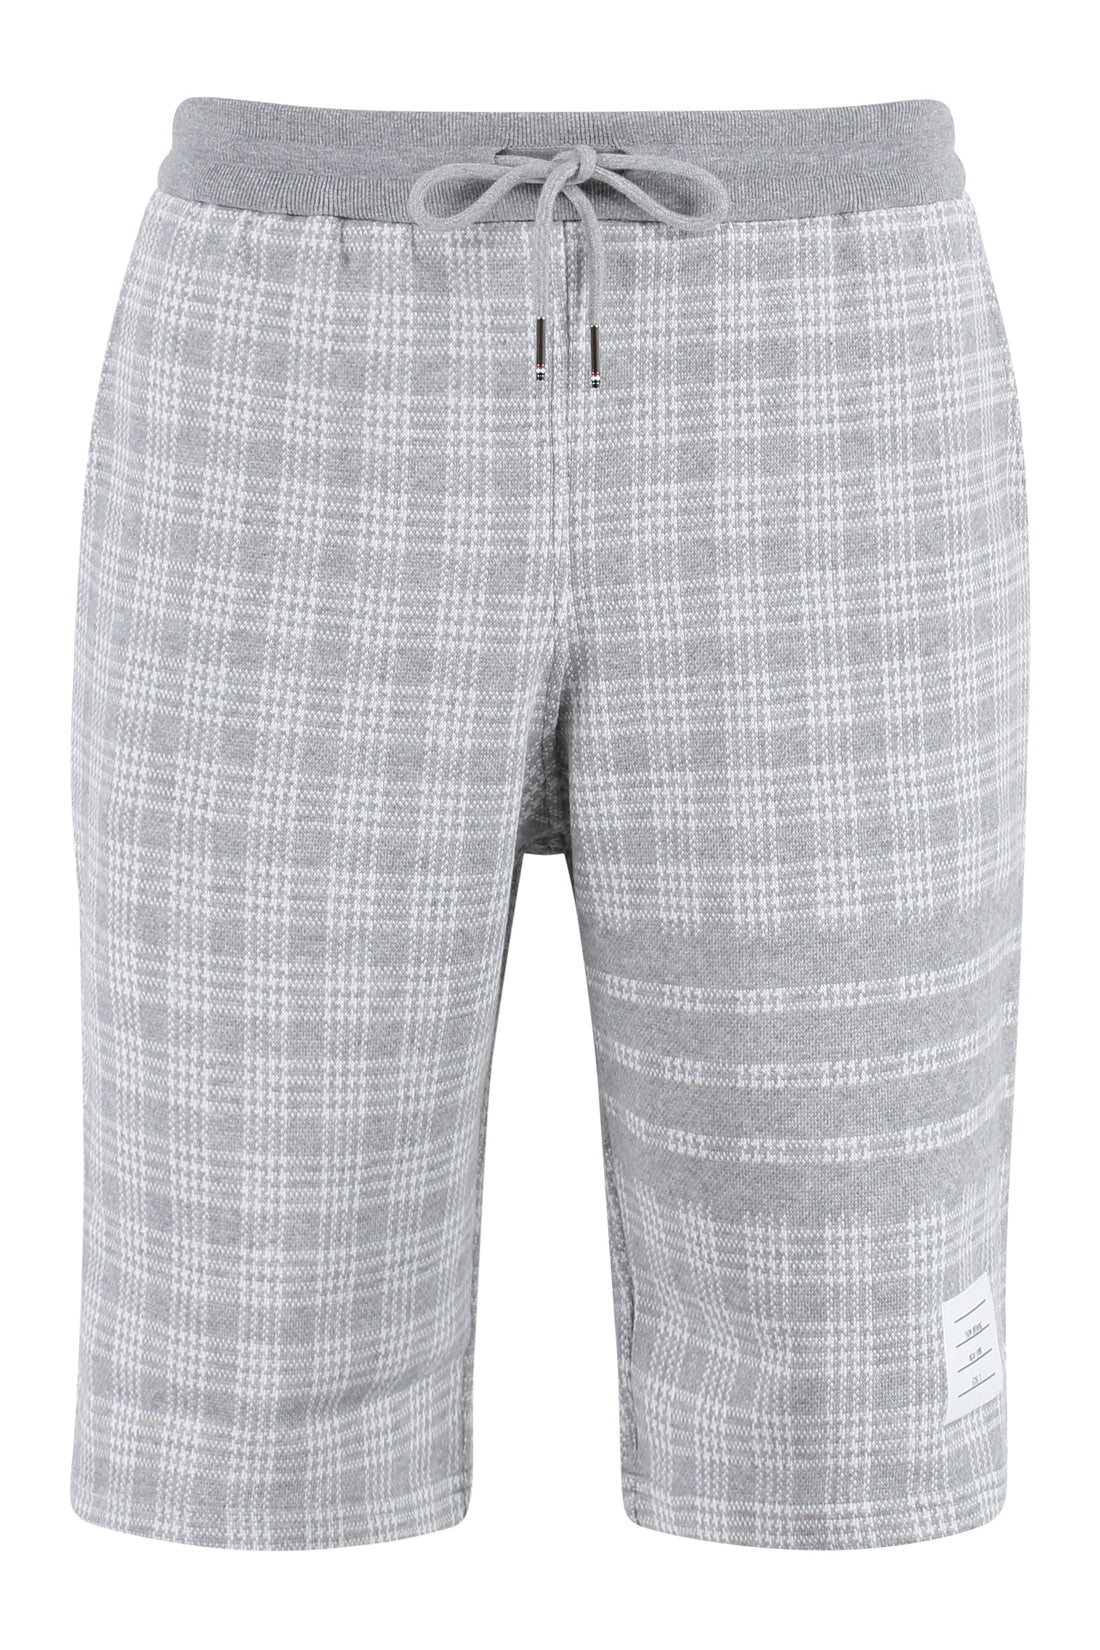 Thom Browne-OUTLET-SALE-Checked cotton shorts-ARCHIVIST